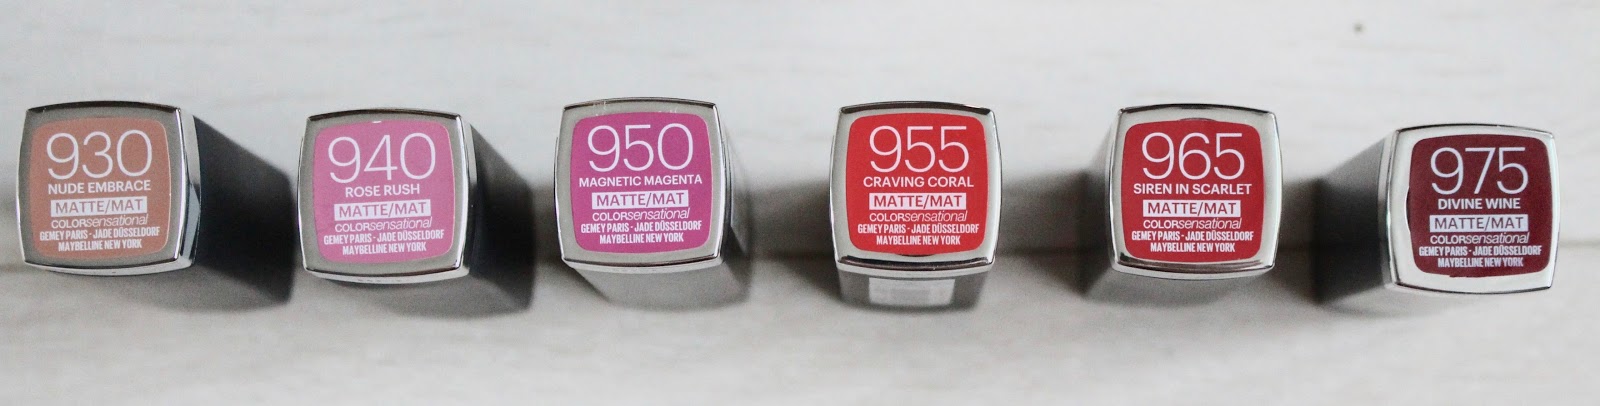 color maybelline mattes creamy the sensational under lip with in: swatches new the radar